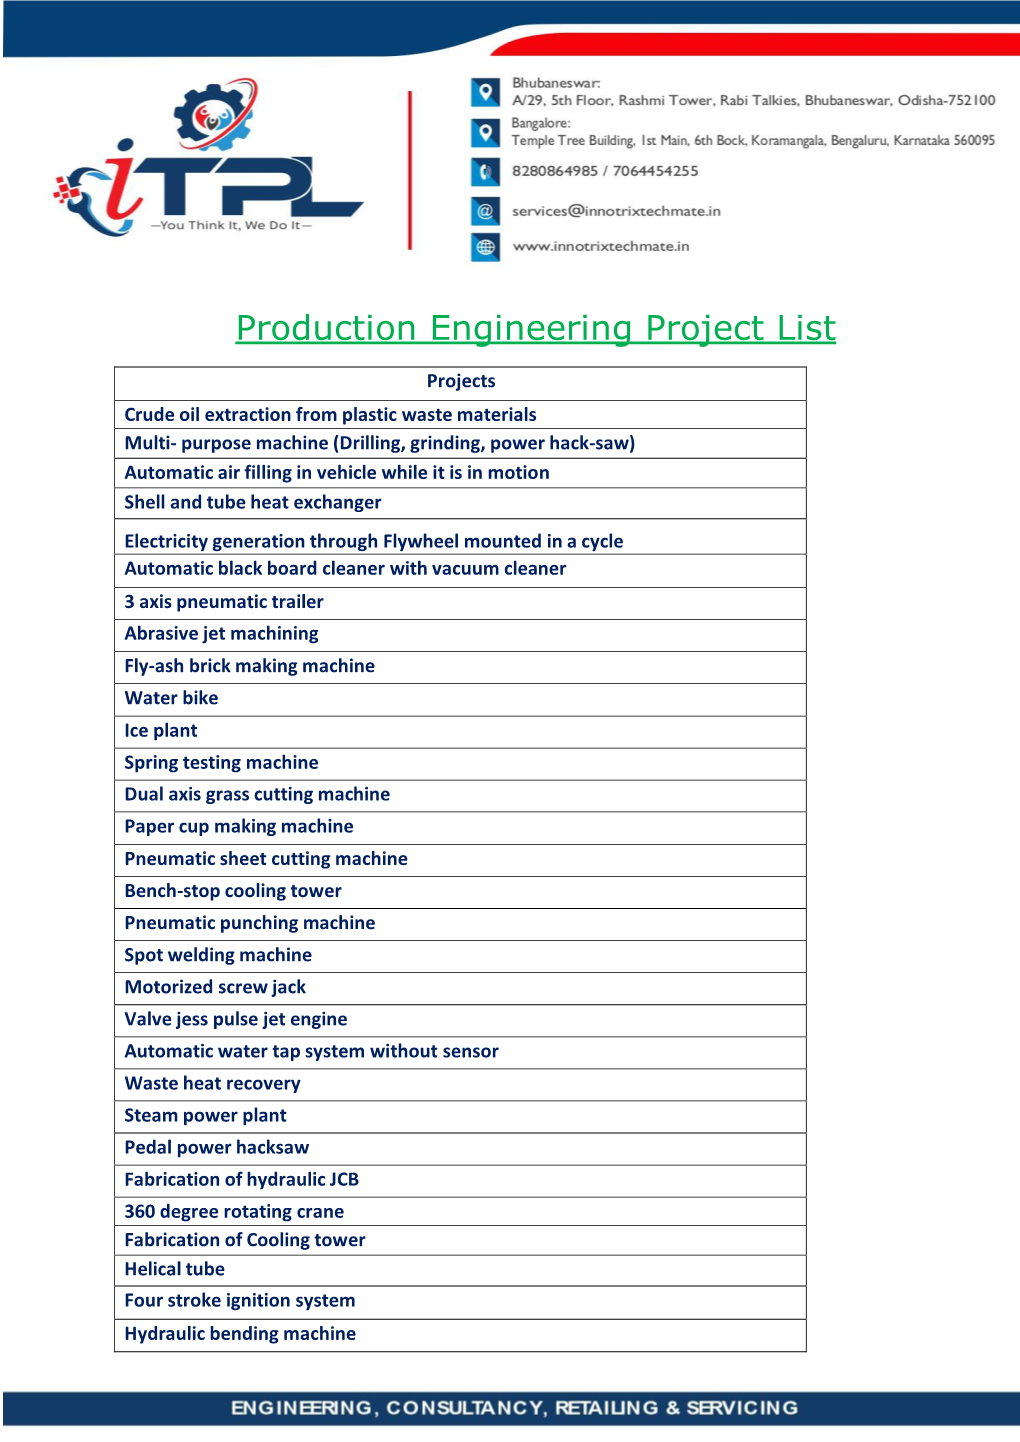 Production Engineering Project List